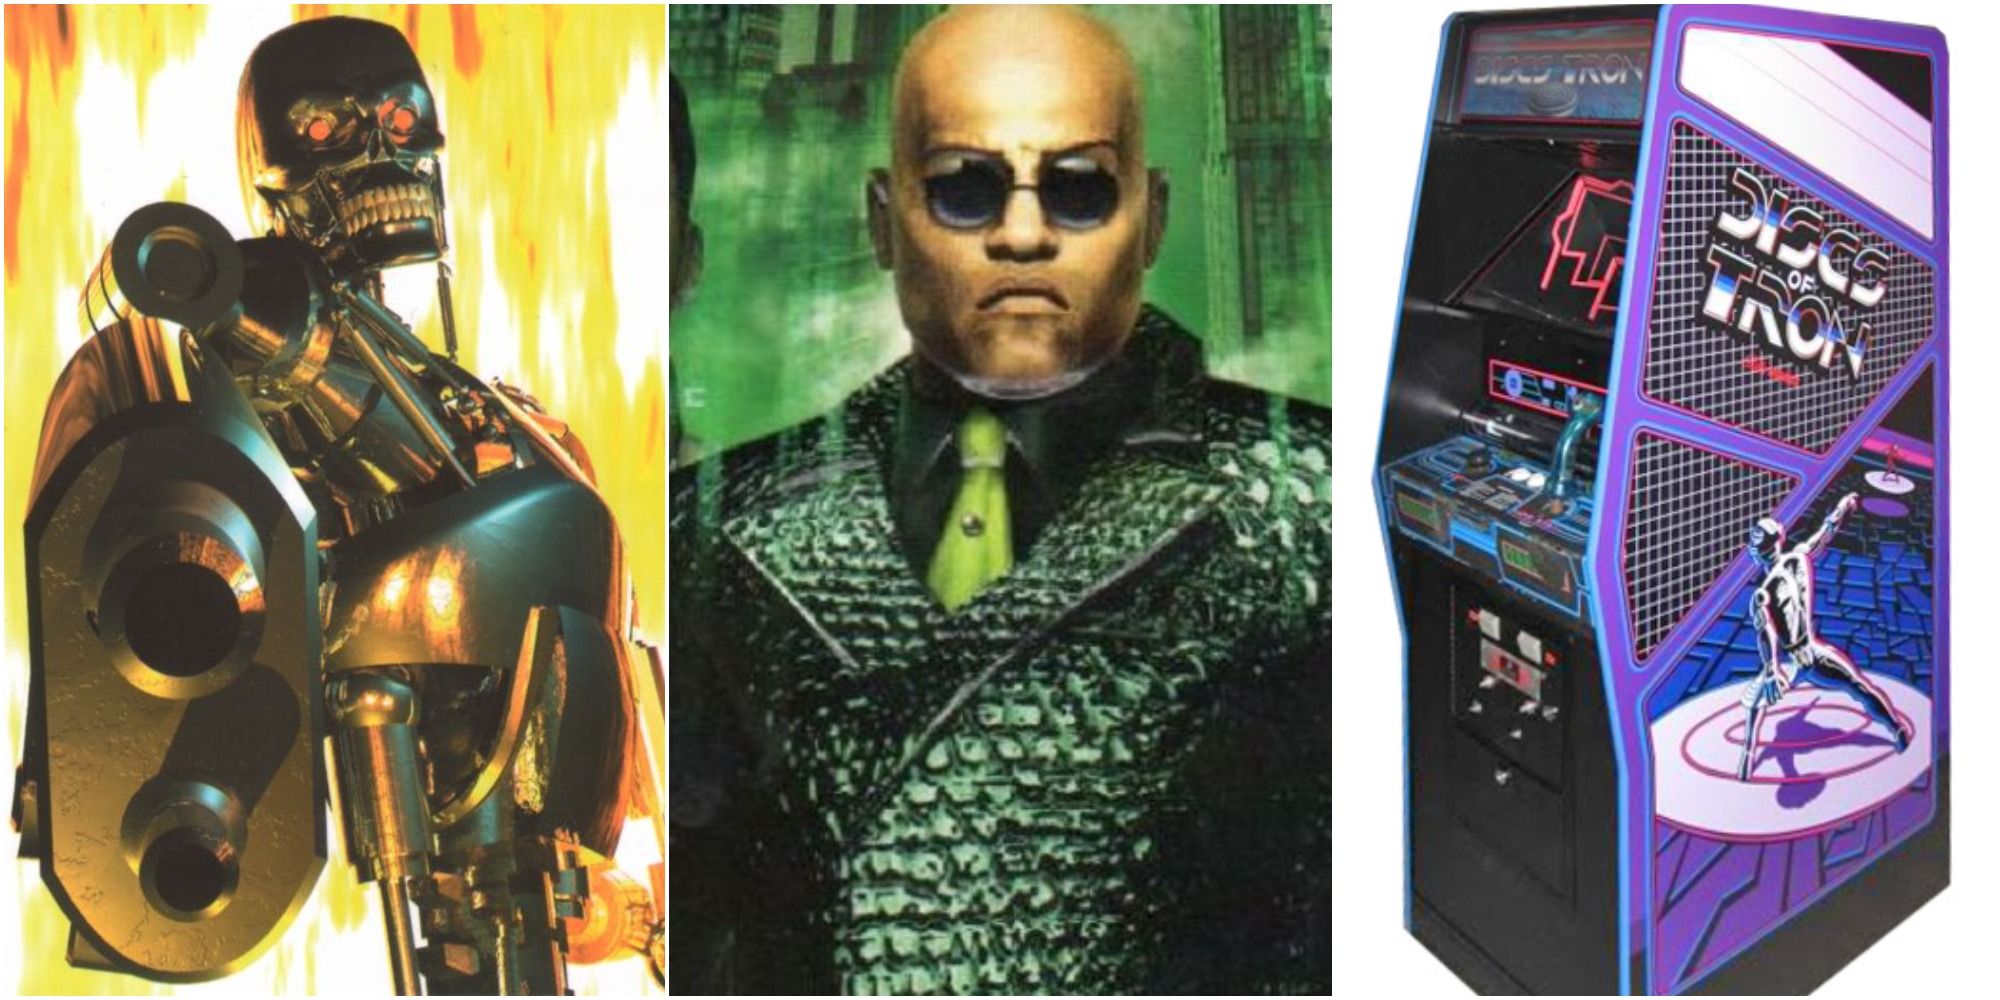 The Terminator from the Skynet game cover, Morpheus from The Matrix Online,  and the arcade machine of Discs of Tron, left to right